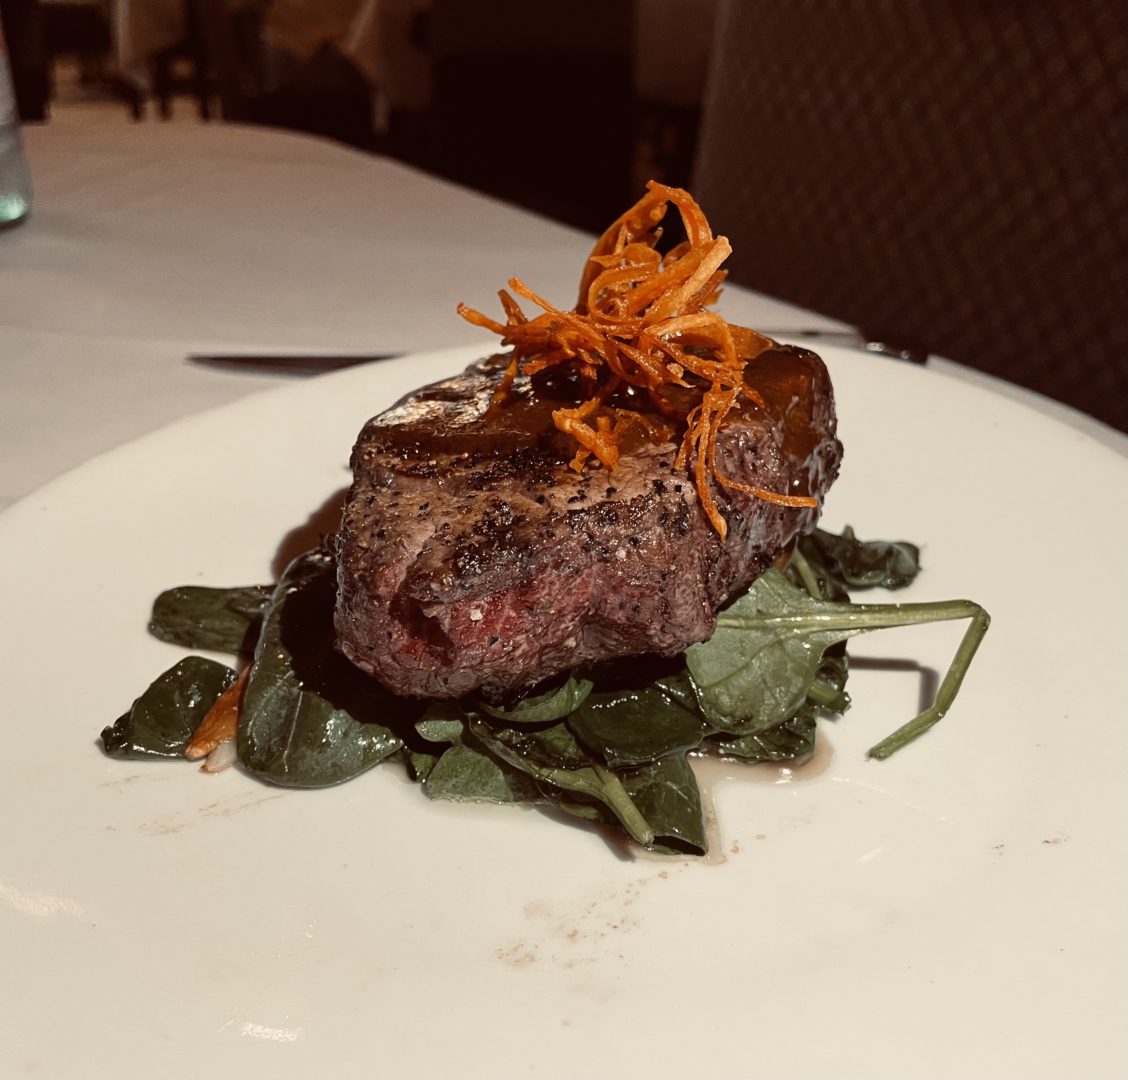 Star of the "Filets of Fall" menu, the filet mignon